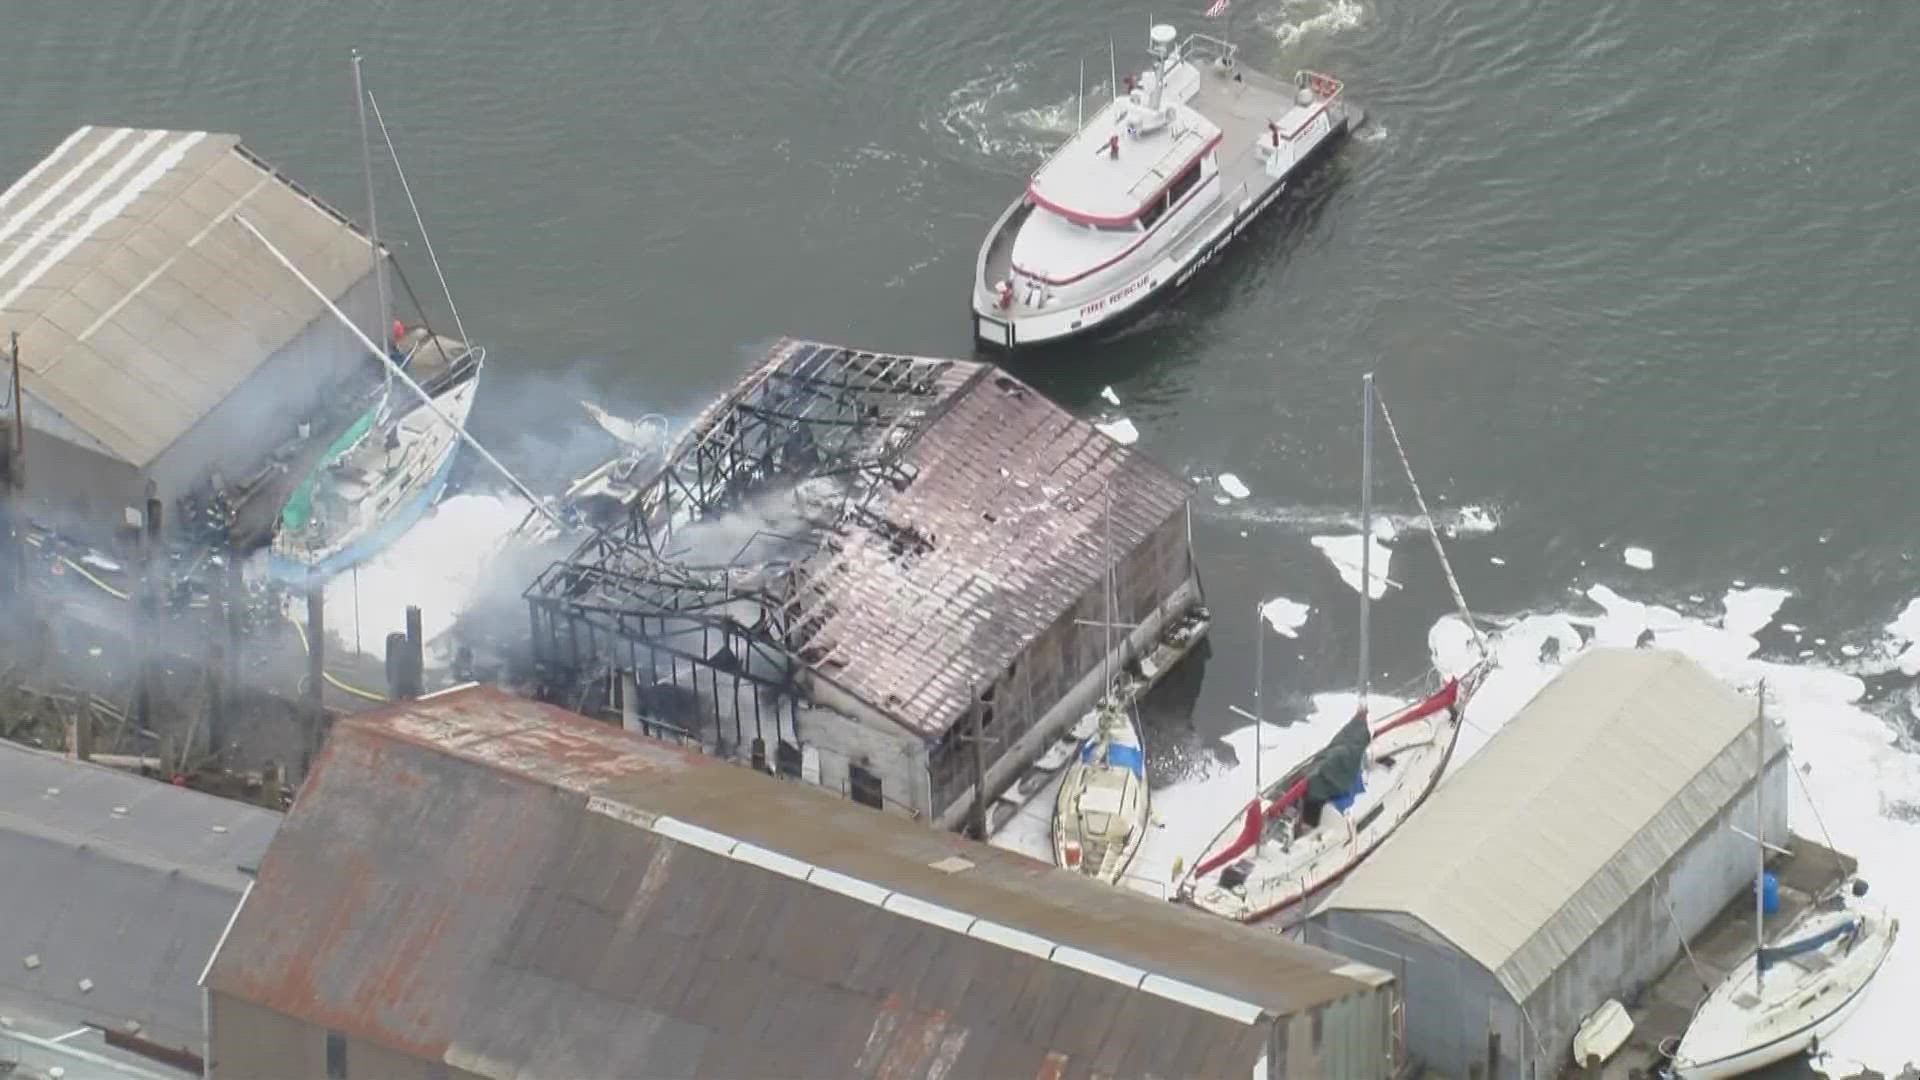 A boathouse and three boats caught fire along the Duwamish River Tuesday.